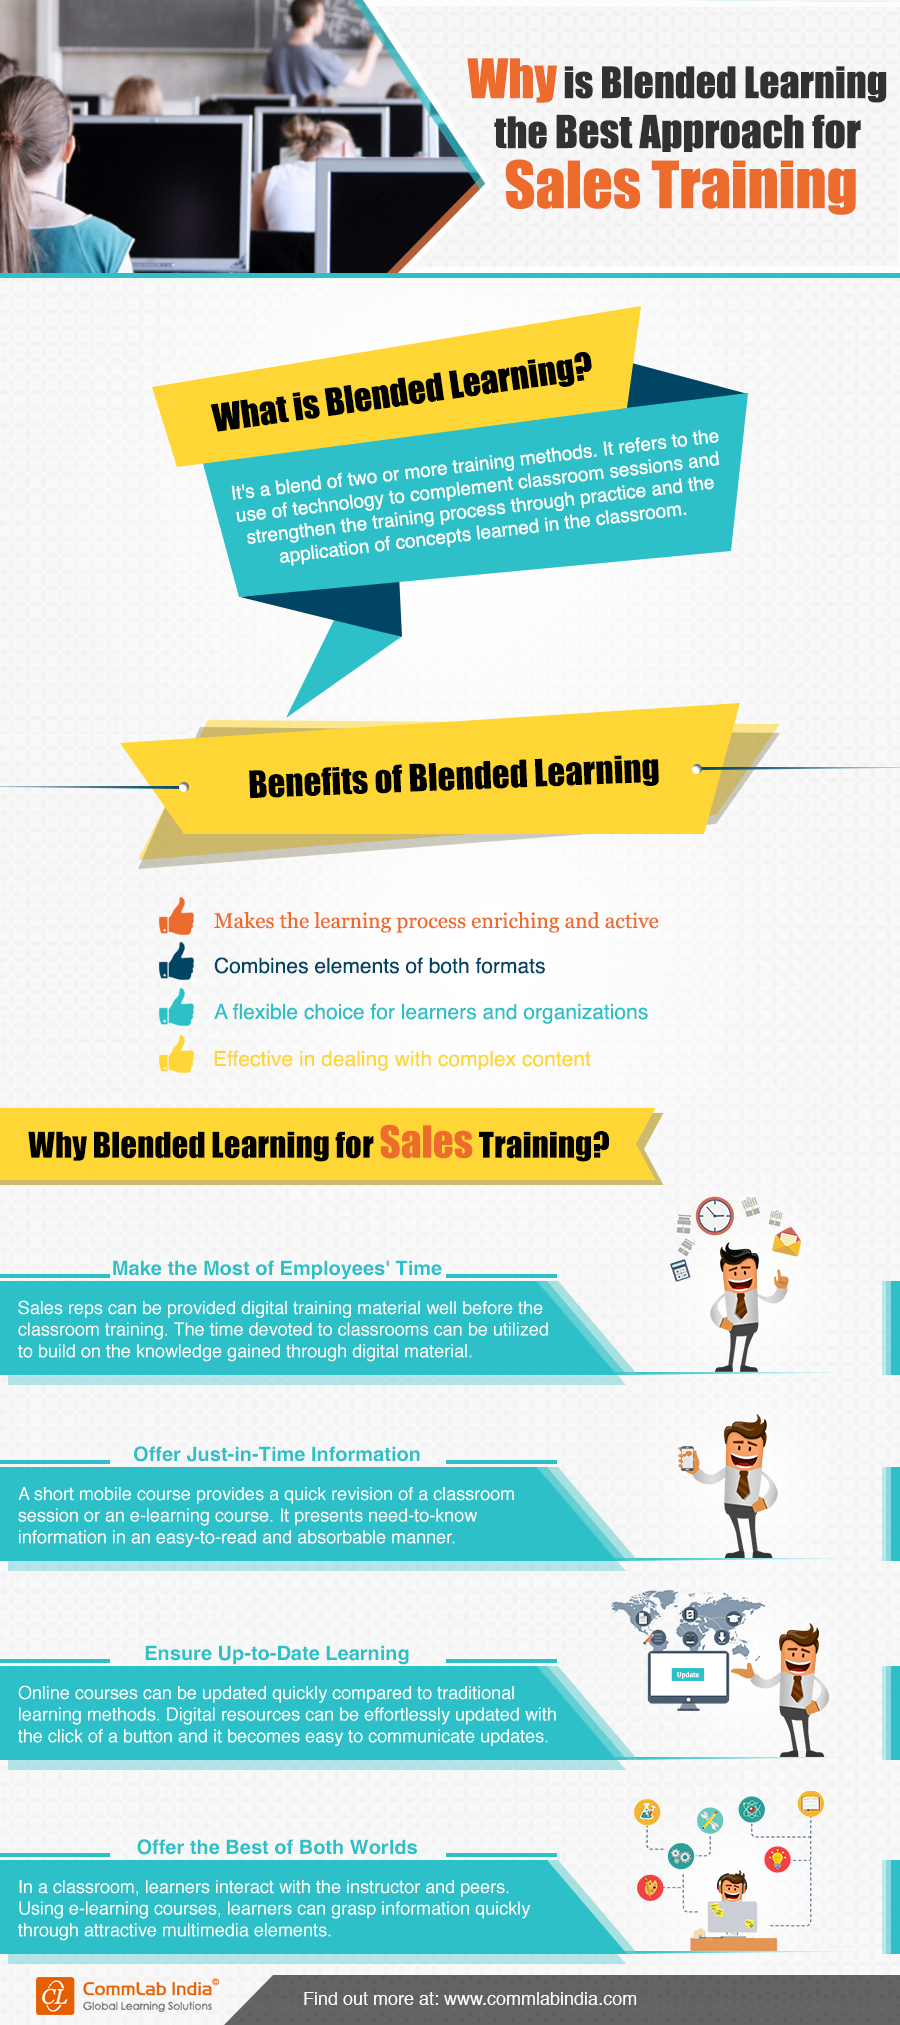 Why is Blended Learning the Best Approach for Sales Training [Infographic]